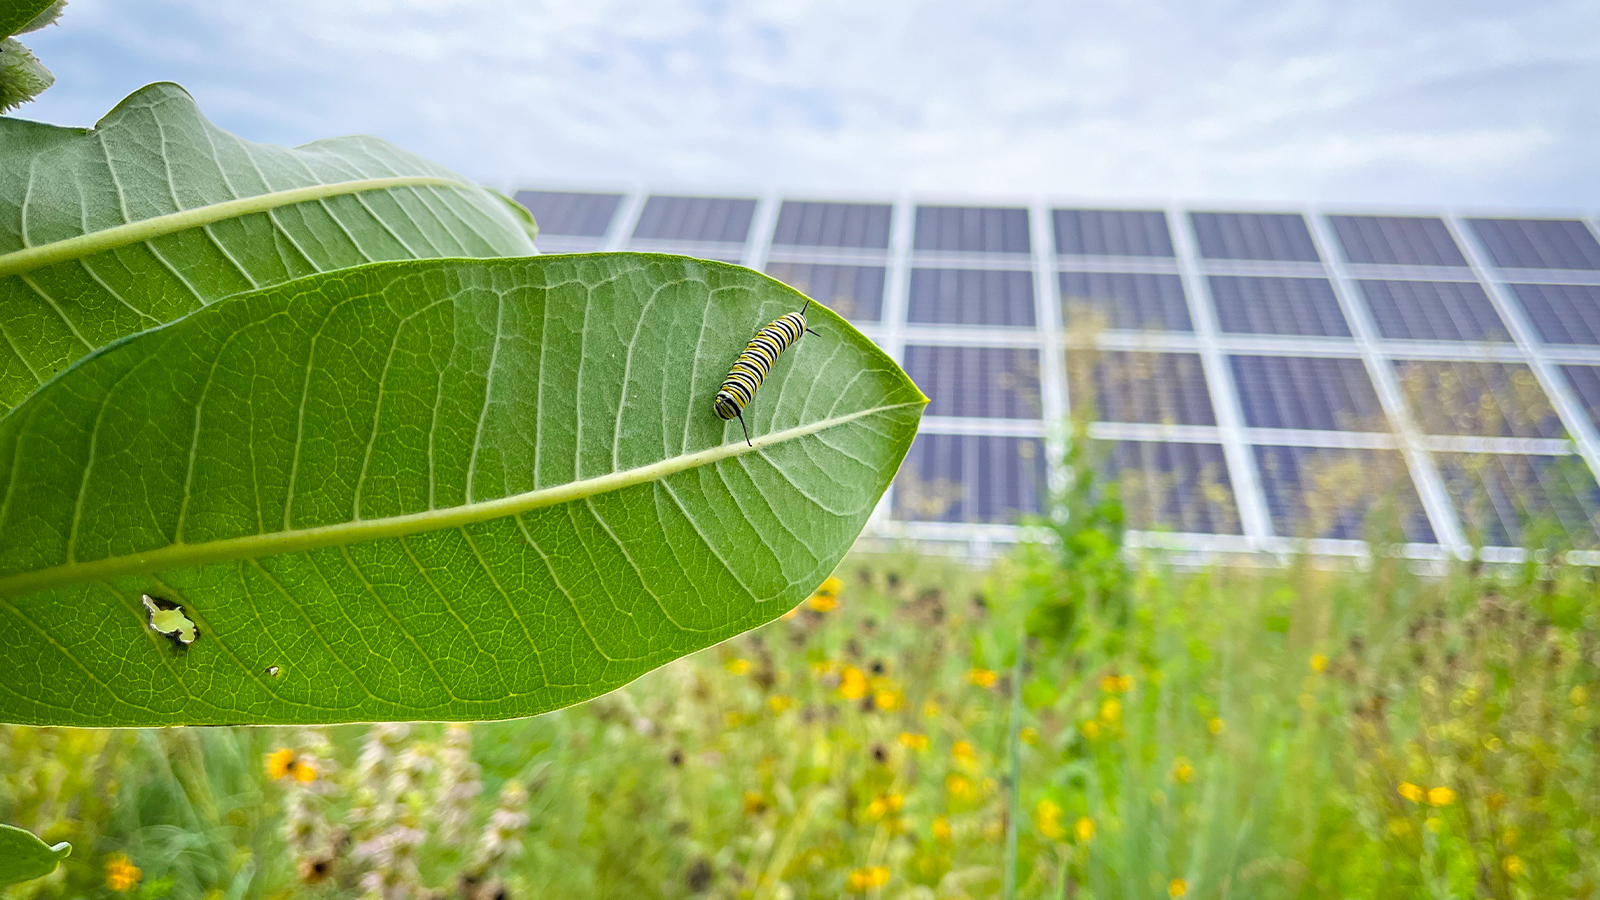 A caterpillar on a leaf in front of solar panels.